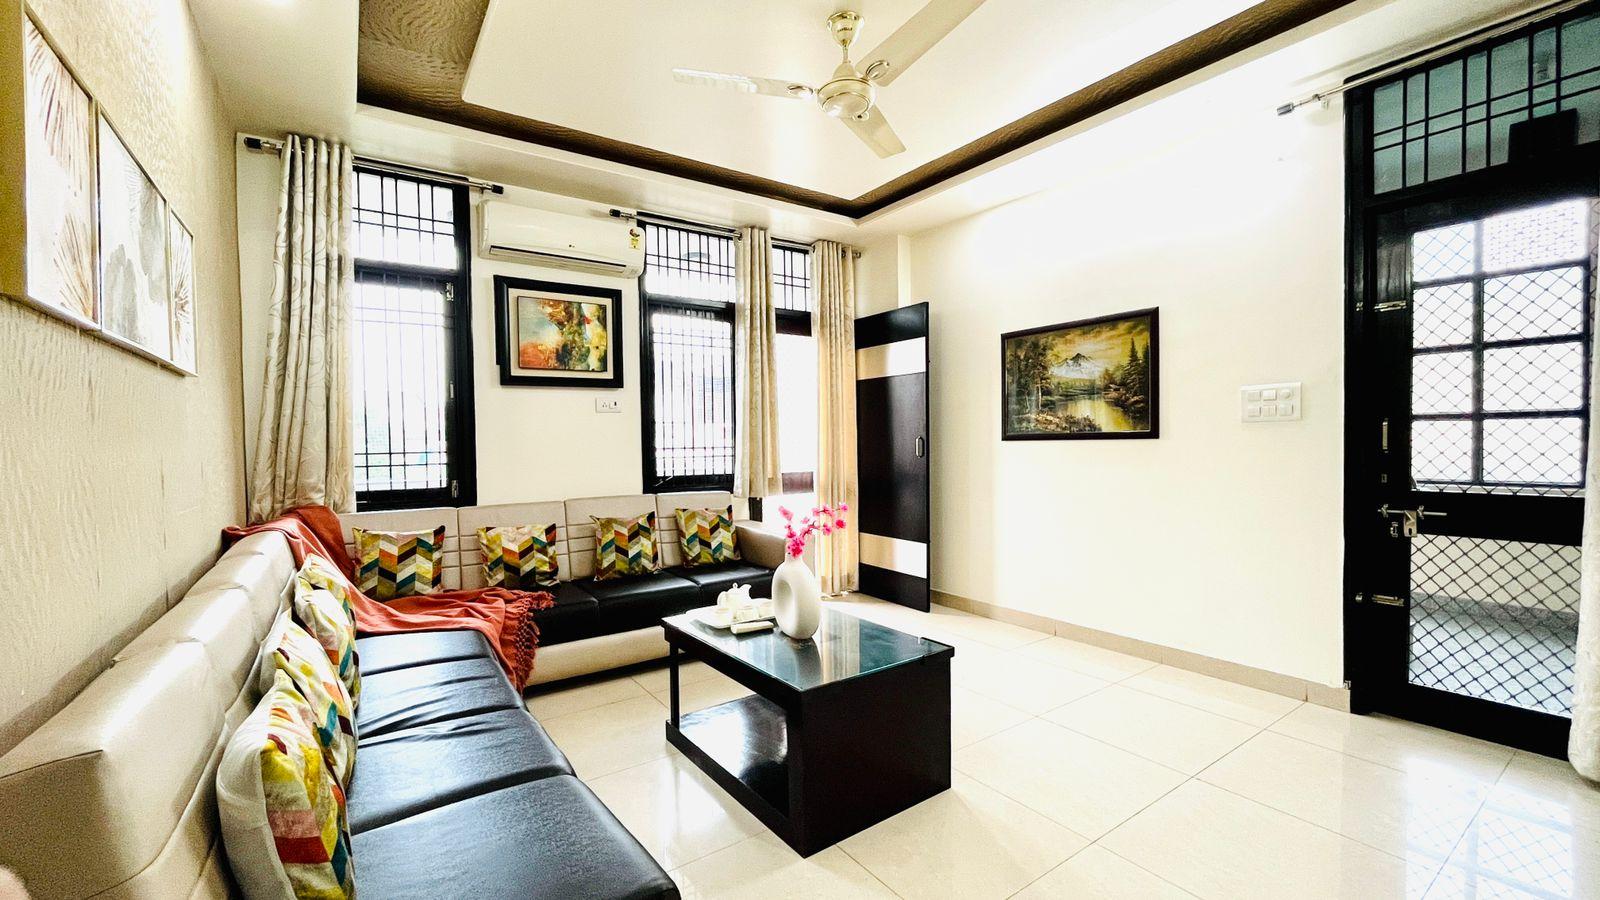 Service Apartments Bangalore: Affordability with comfort for all